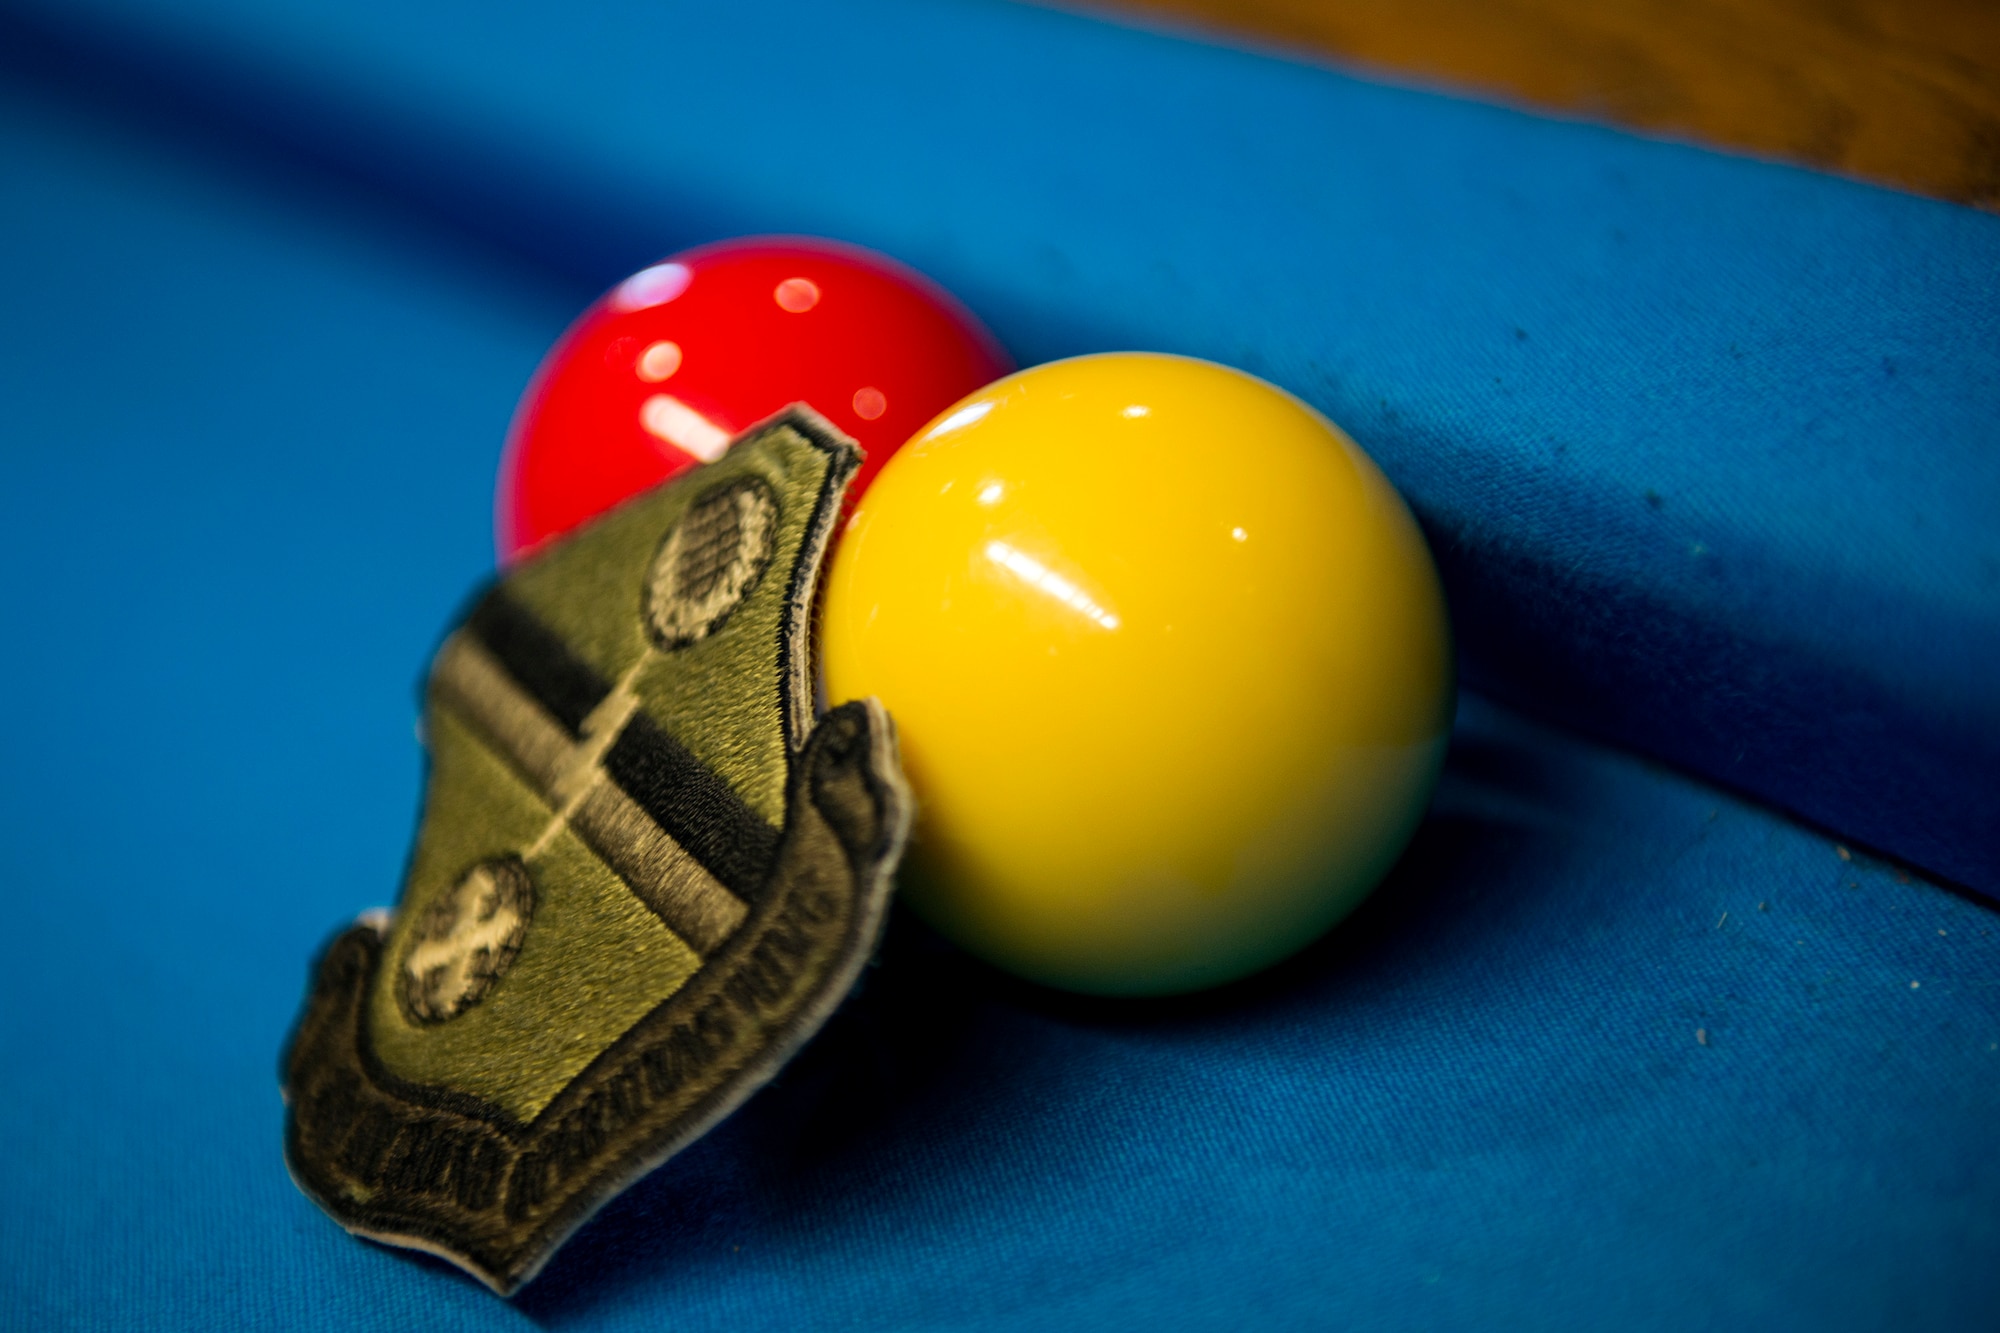 Billiard balls and a uniform patch rest on a billiard table during a spouses crud tourney, April 27, 2018, at Moody Air Force Base, Ga. The Moody spouses built the event around teamwork and comradery, giving them an opportunity to experience a long-held tradition amongst the Air Force fighter and rescue squadrons. Though the game originated in the Royal Canadian Air Force, it has since been adopted by the U.S. (U.S. Air Force photo by Airman 1st Class Erick Requadt)